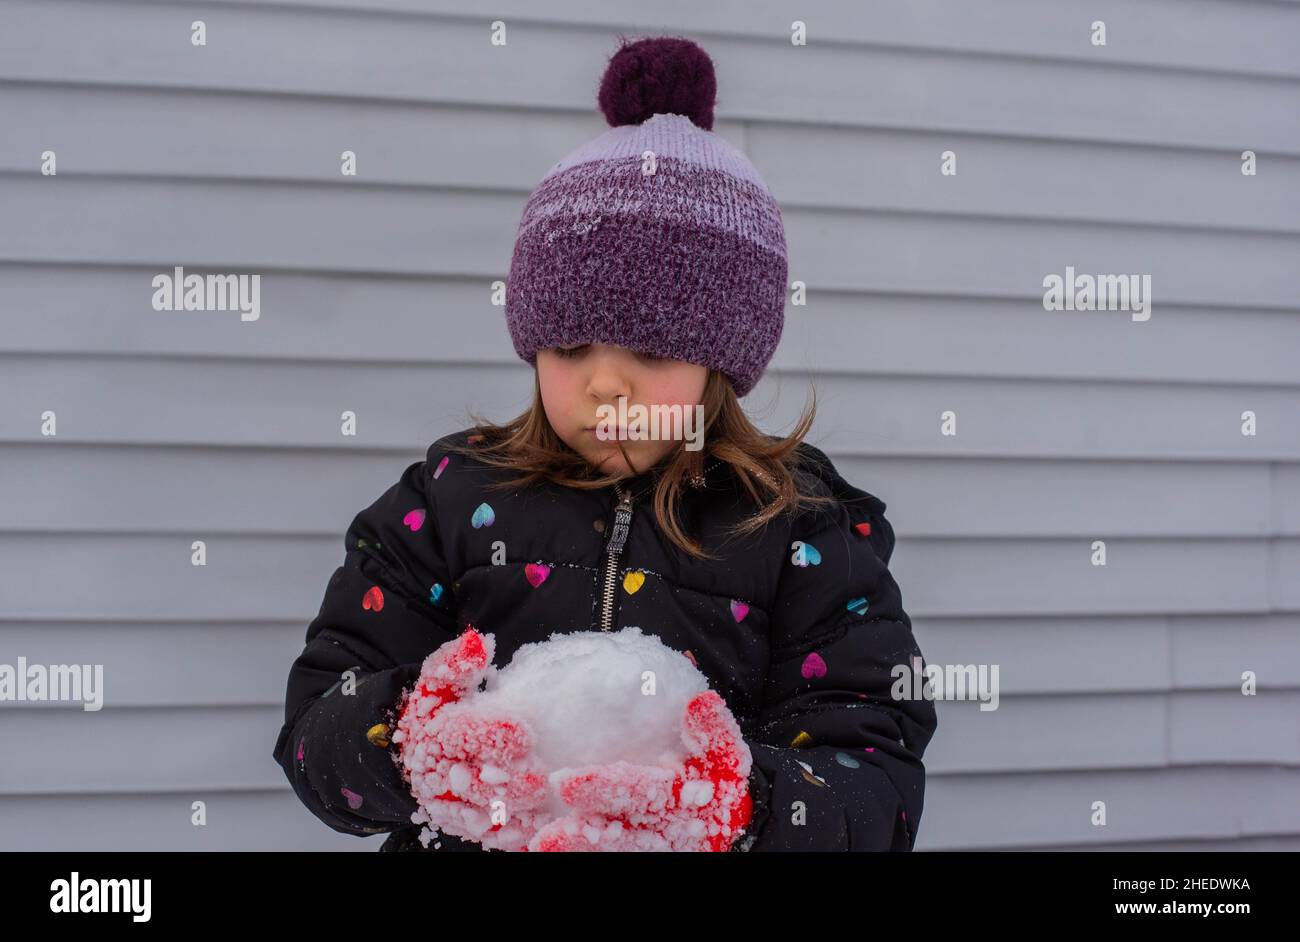 A young girl wearing winter clothes and holding snow in the winter. Stock Photo